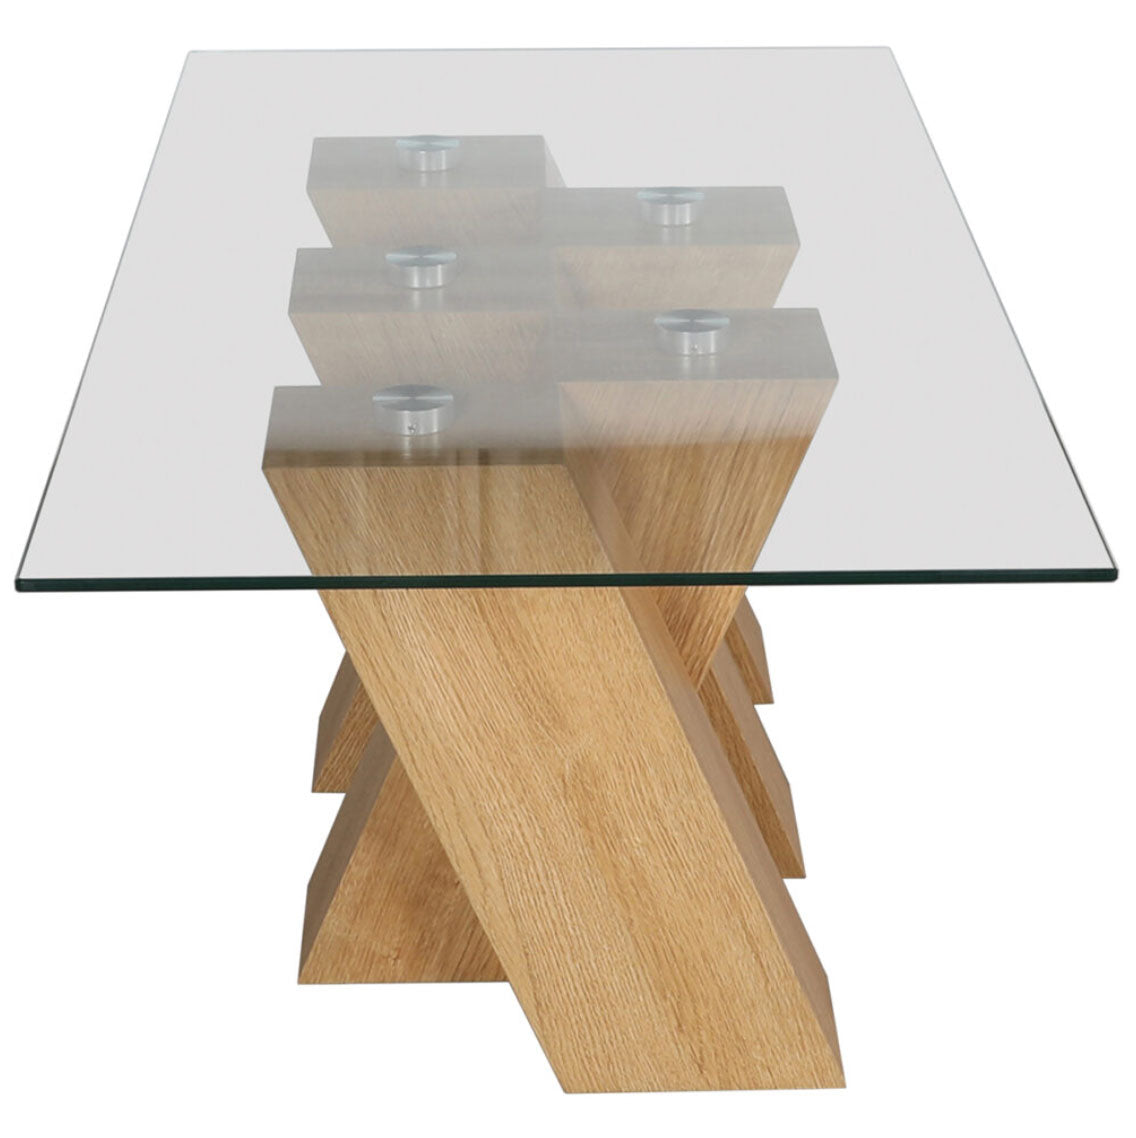 Manor Collection Nevada Coffee Table